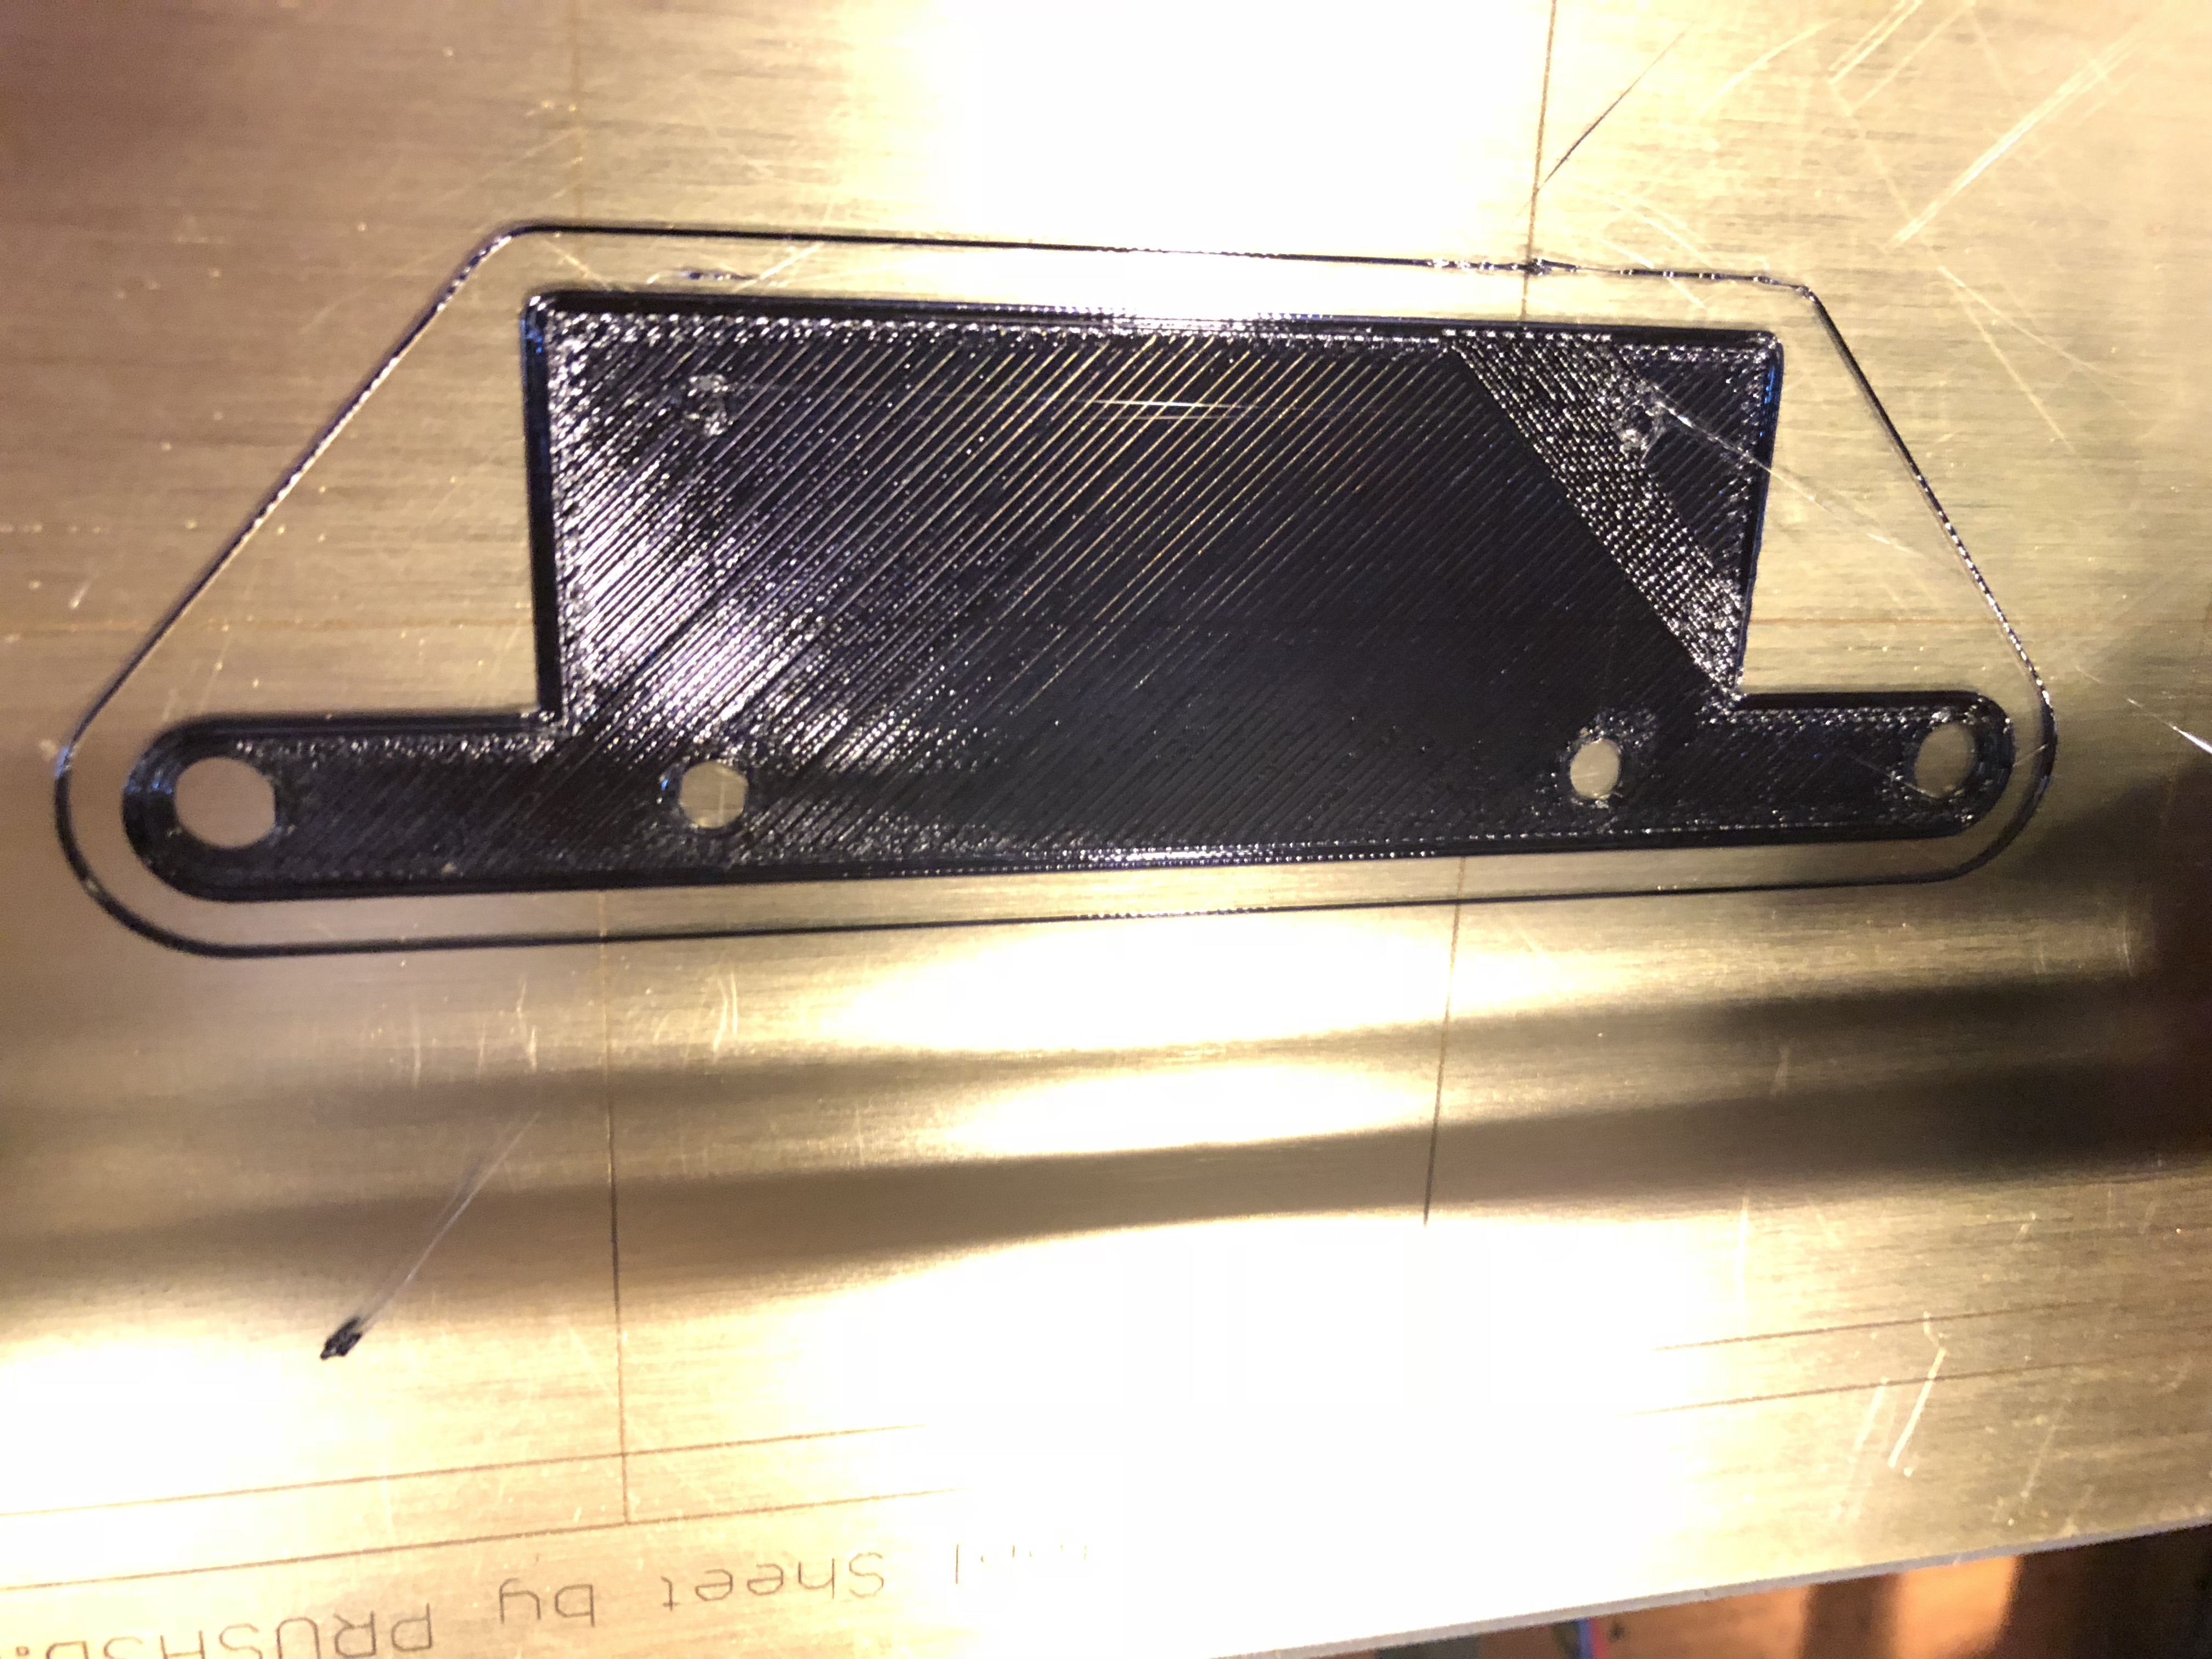 Another PETG question – How I this? (Printing – Prusa3D